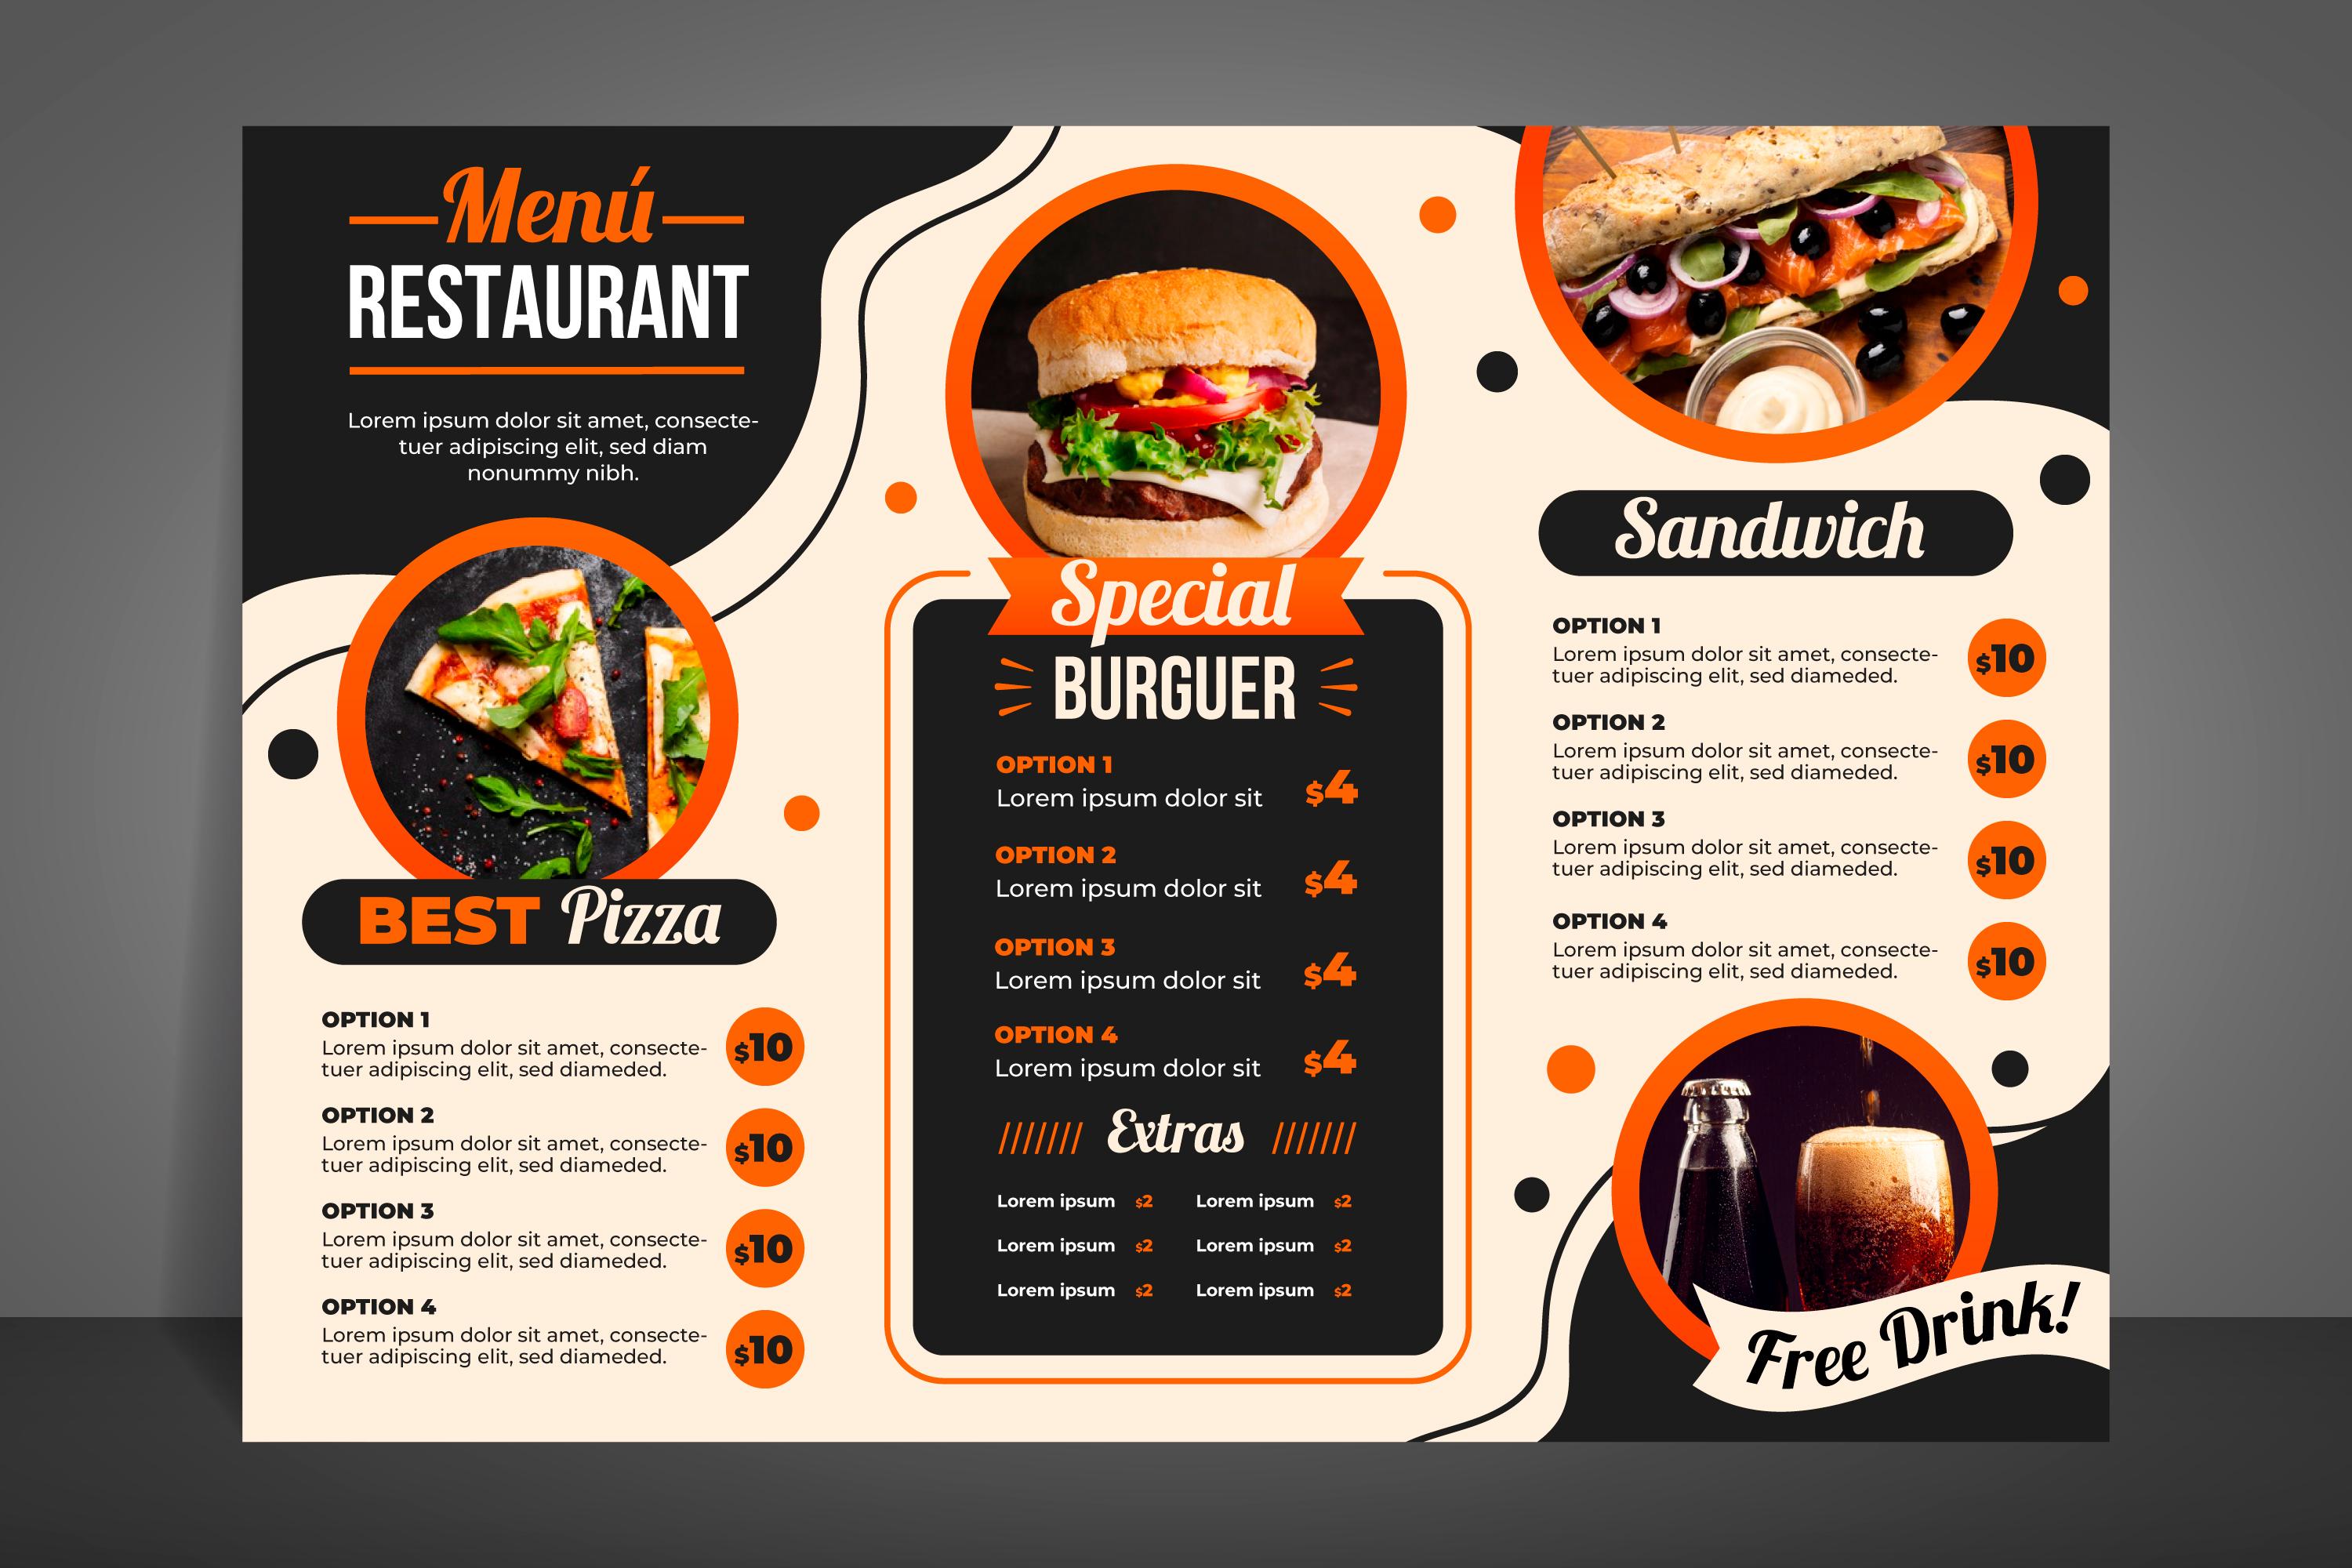 The Role of Color and Imagery in Menu Design